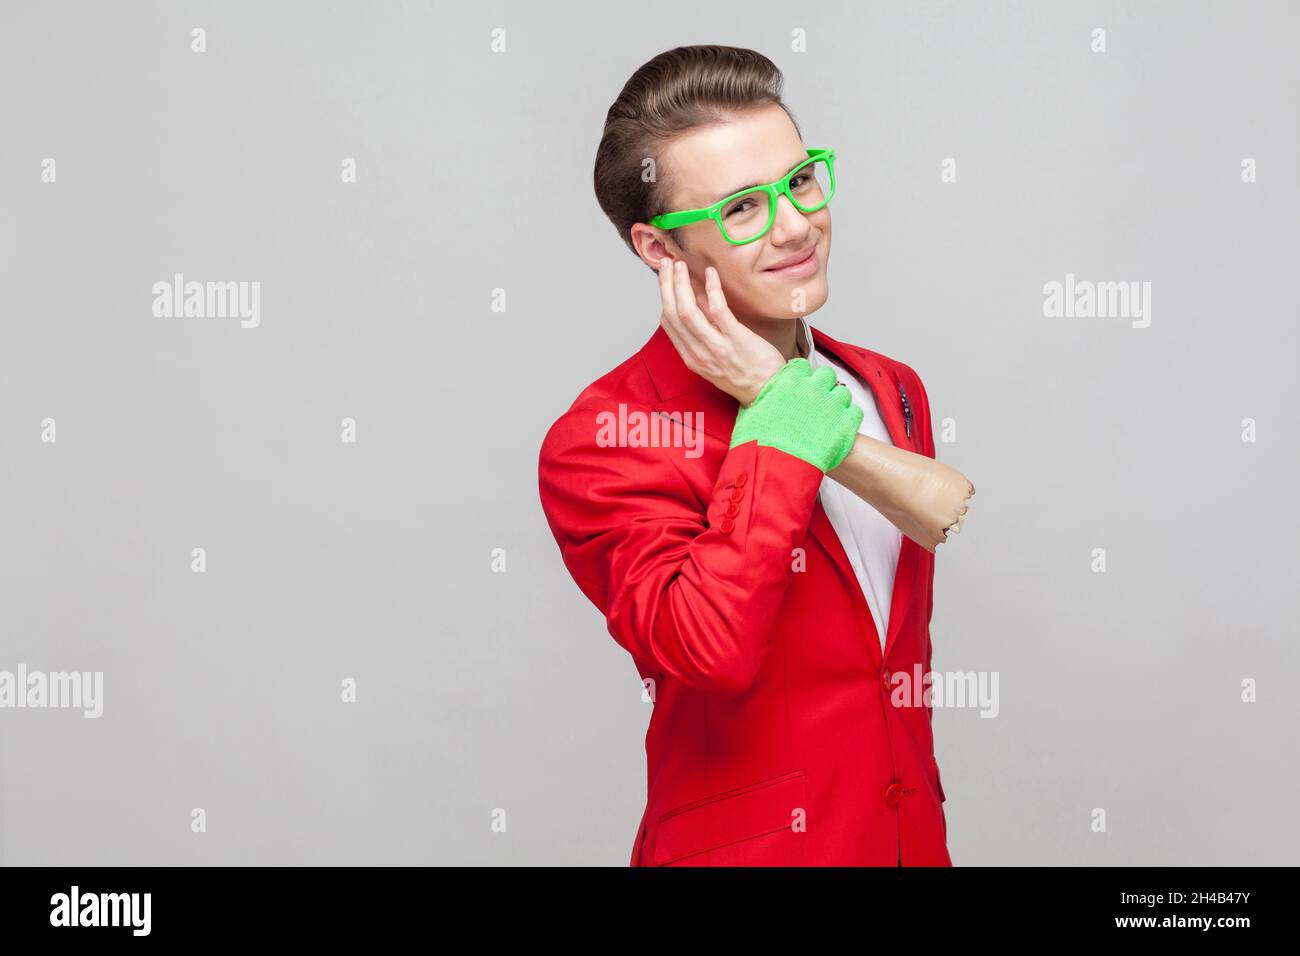 Portrait of positive funny gentleman with eyeglasses in red tuxedo and green gloves holding zombie hand, stroking his cheek or pretending to make phone call. studio shot isolated on gray background Stock Photo